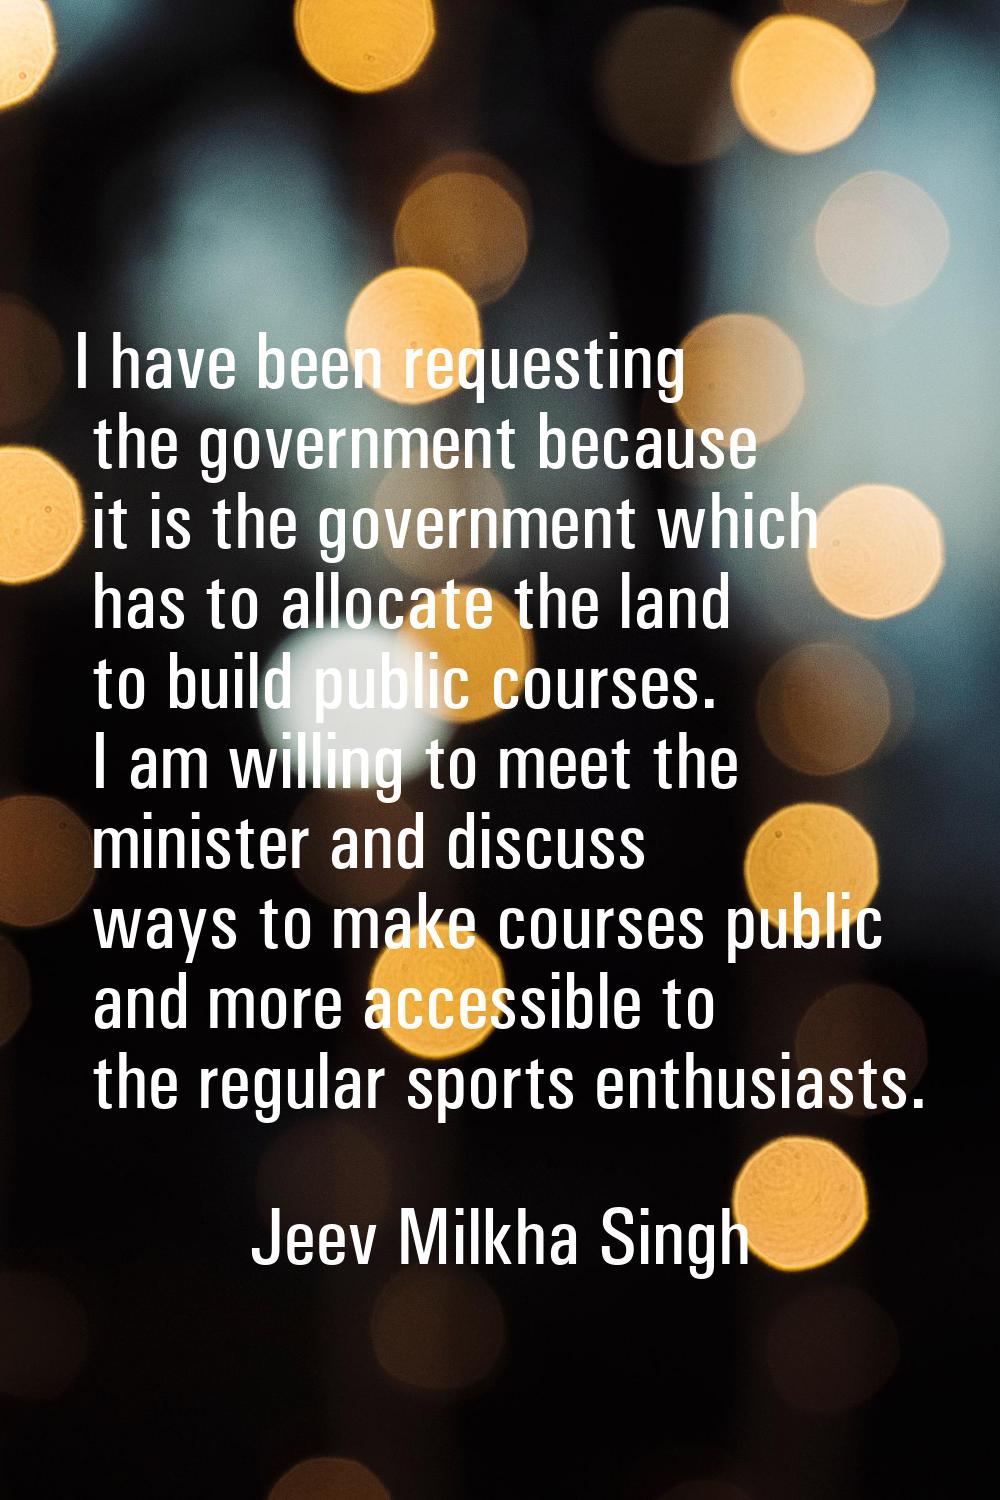 I have been requesting the government because it is the government which has to allocate the land t